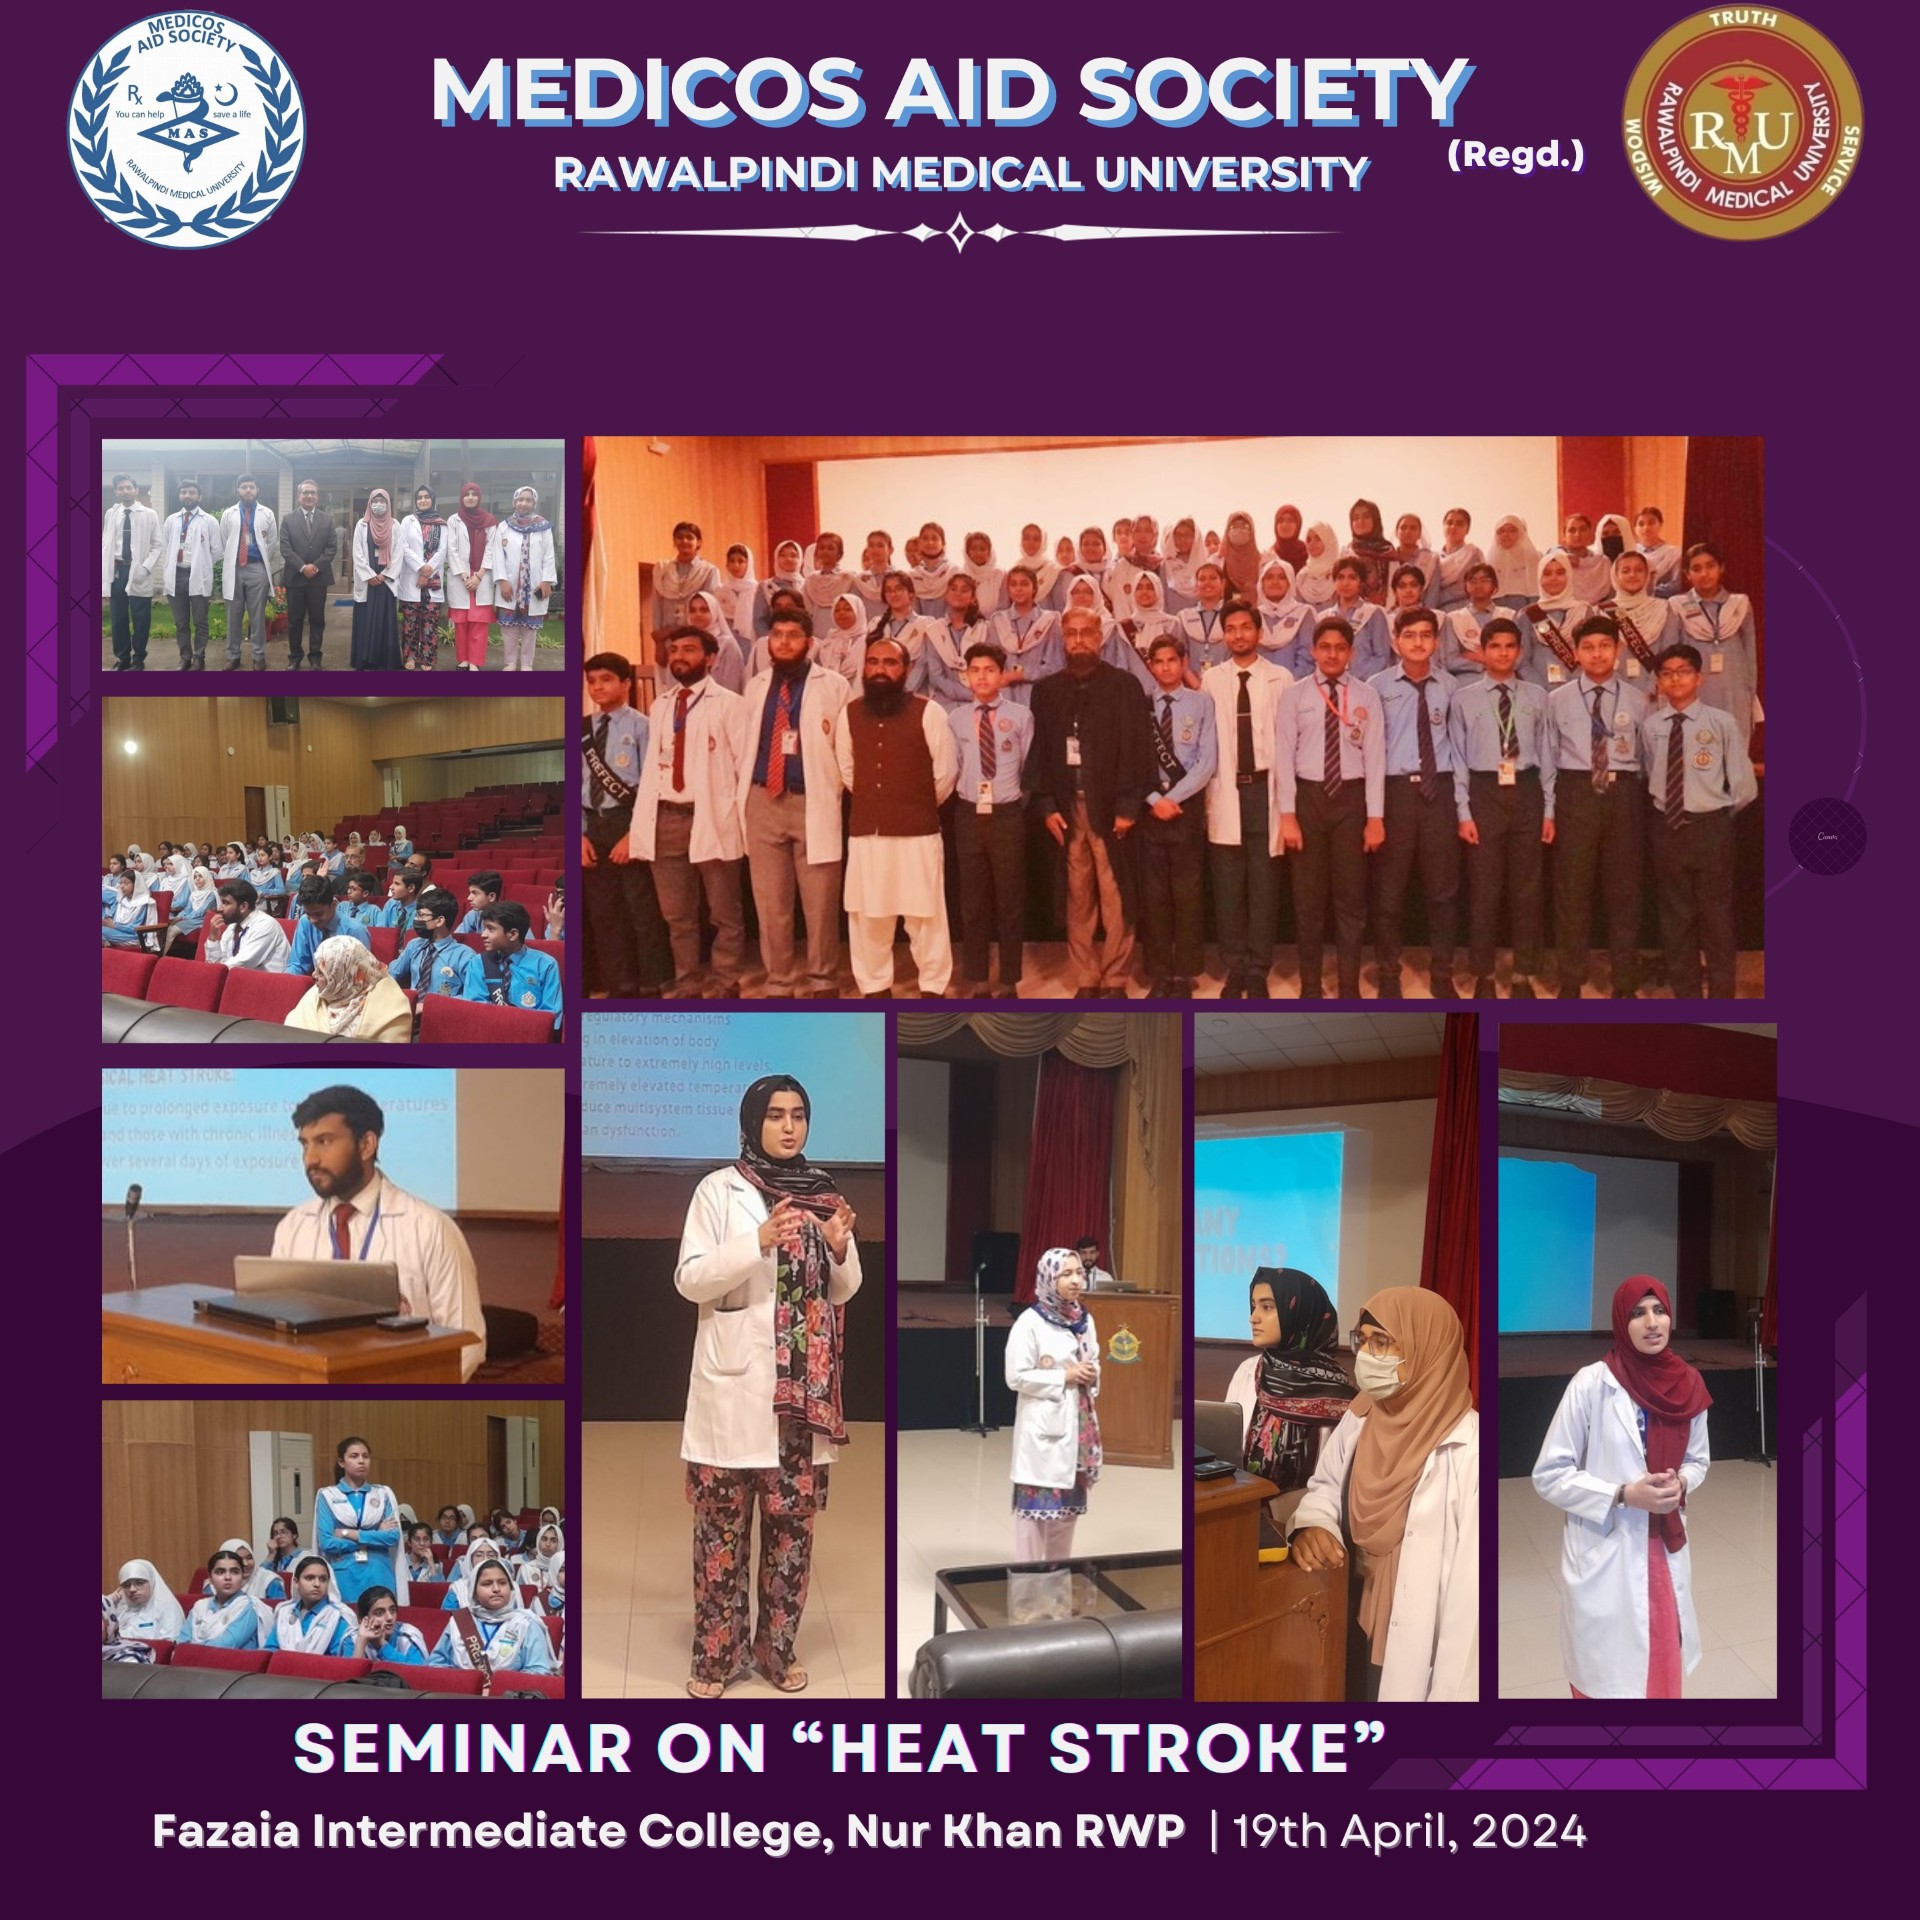 Medicos Aid Society has organized a seminar on topic Heat Stroke on Friday, 19th April 2024 at Fazaia Intermediate College, Nur Khan Rawalpindi. In this seminar, the students were educated regarding adverse effects, signs & symptoms and preventive measures of this condition.